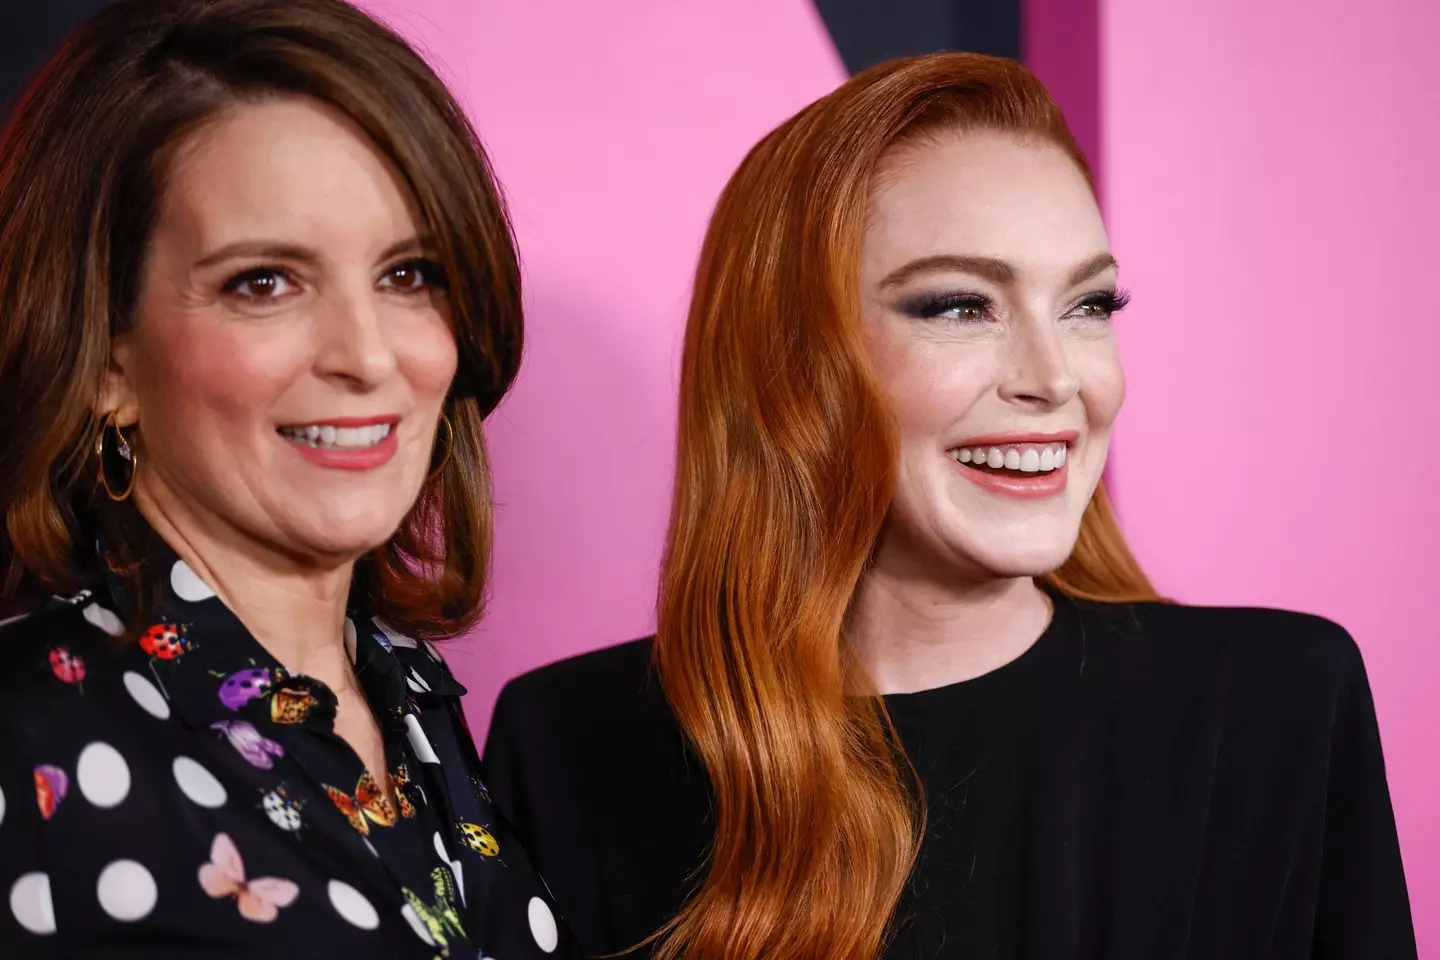 Lindsay Lohan and Tina Fey at the premiere of Mean Girls.